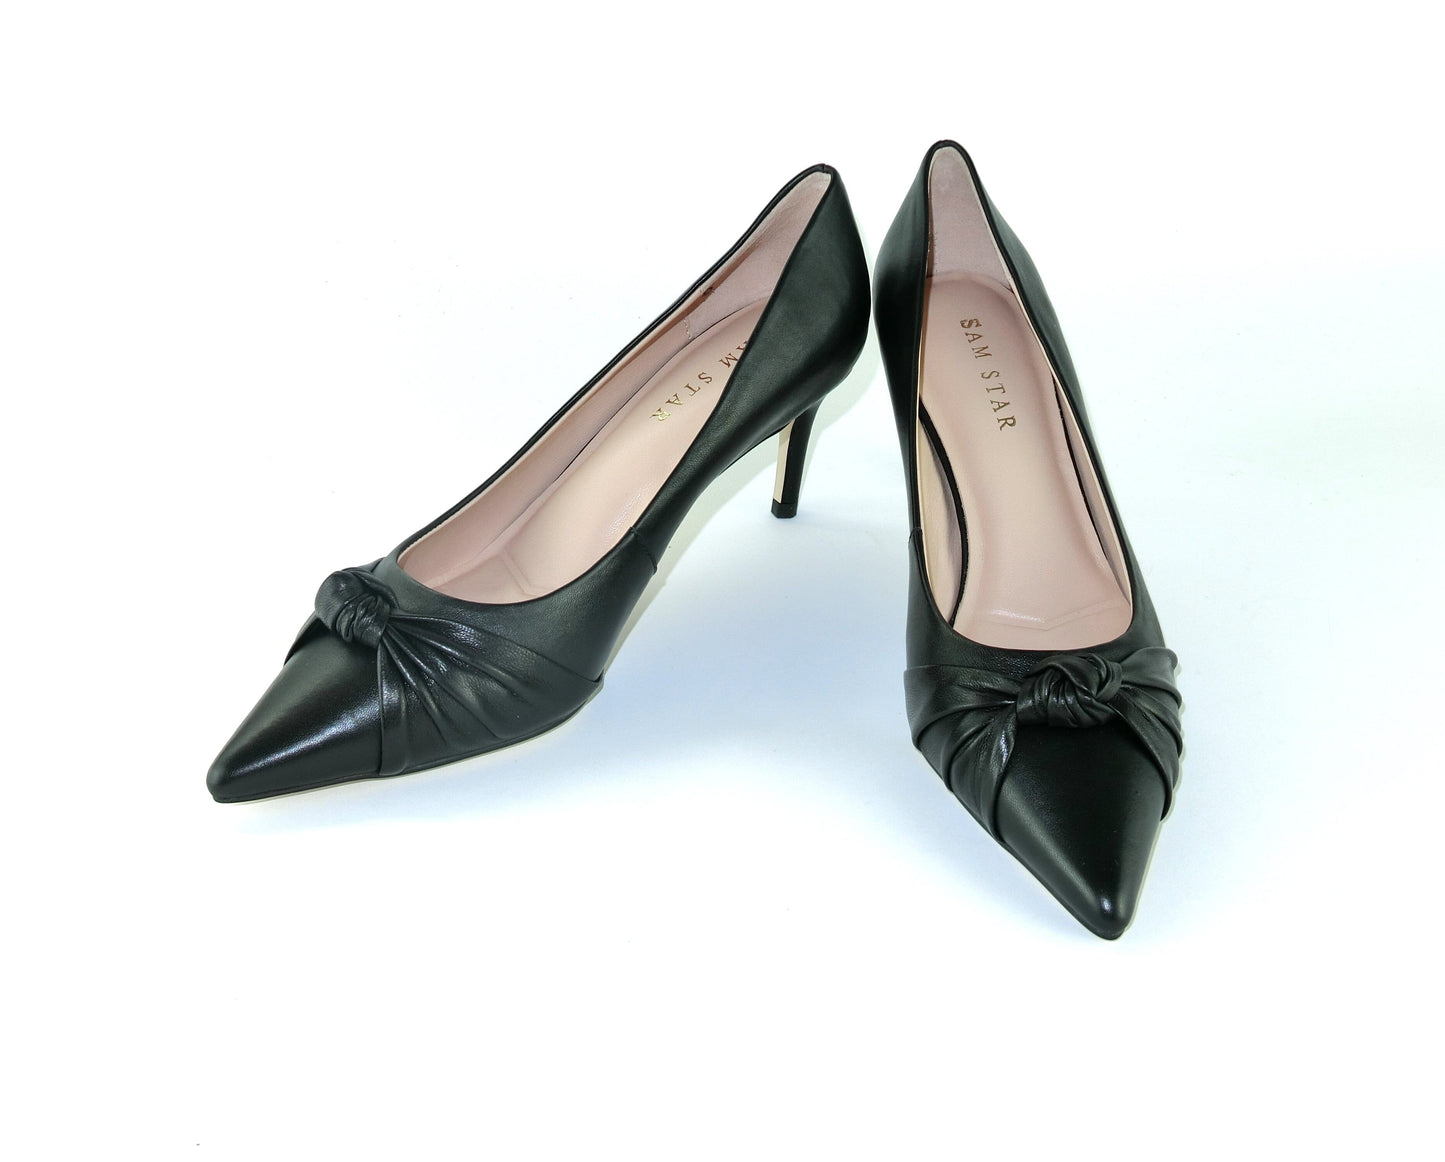 SS23004 Leather court shoes with knot design - Black and Tan ladies shoes Sam Star shoes Black 40/7 